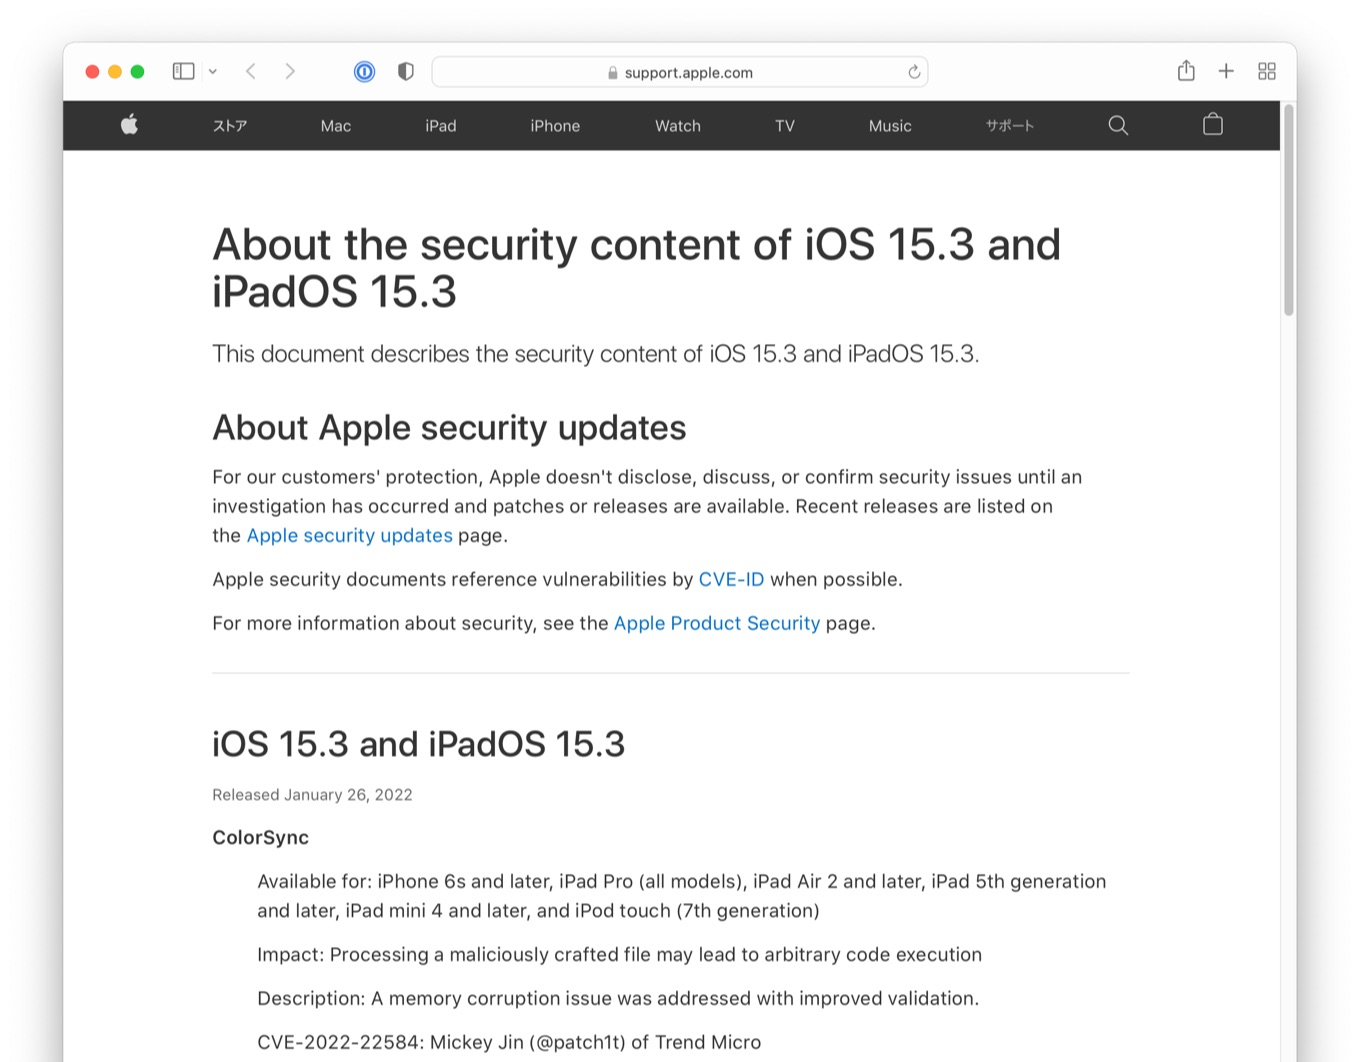 About the security content of iOS 15.3 and iPadOS 15.3